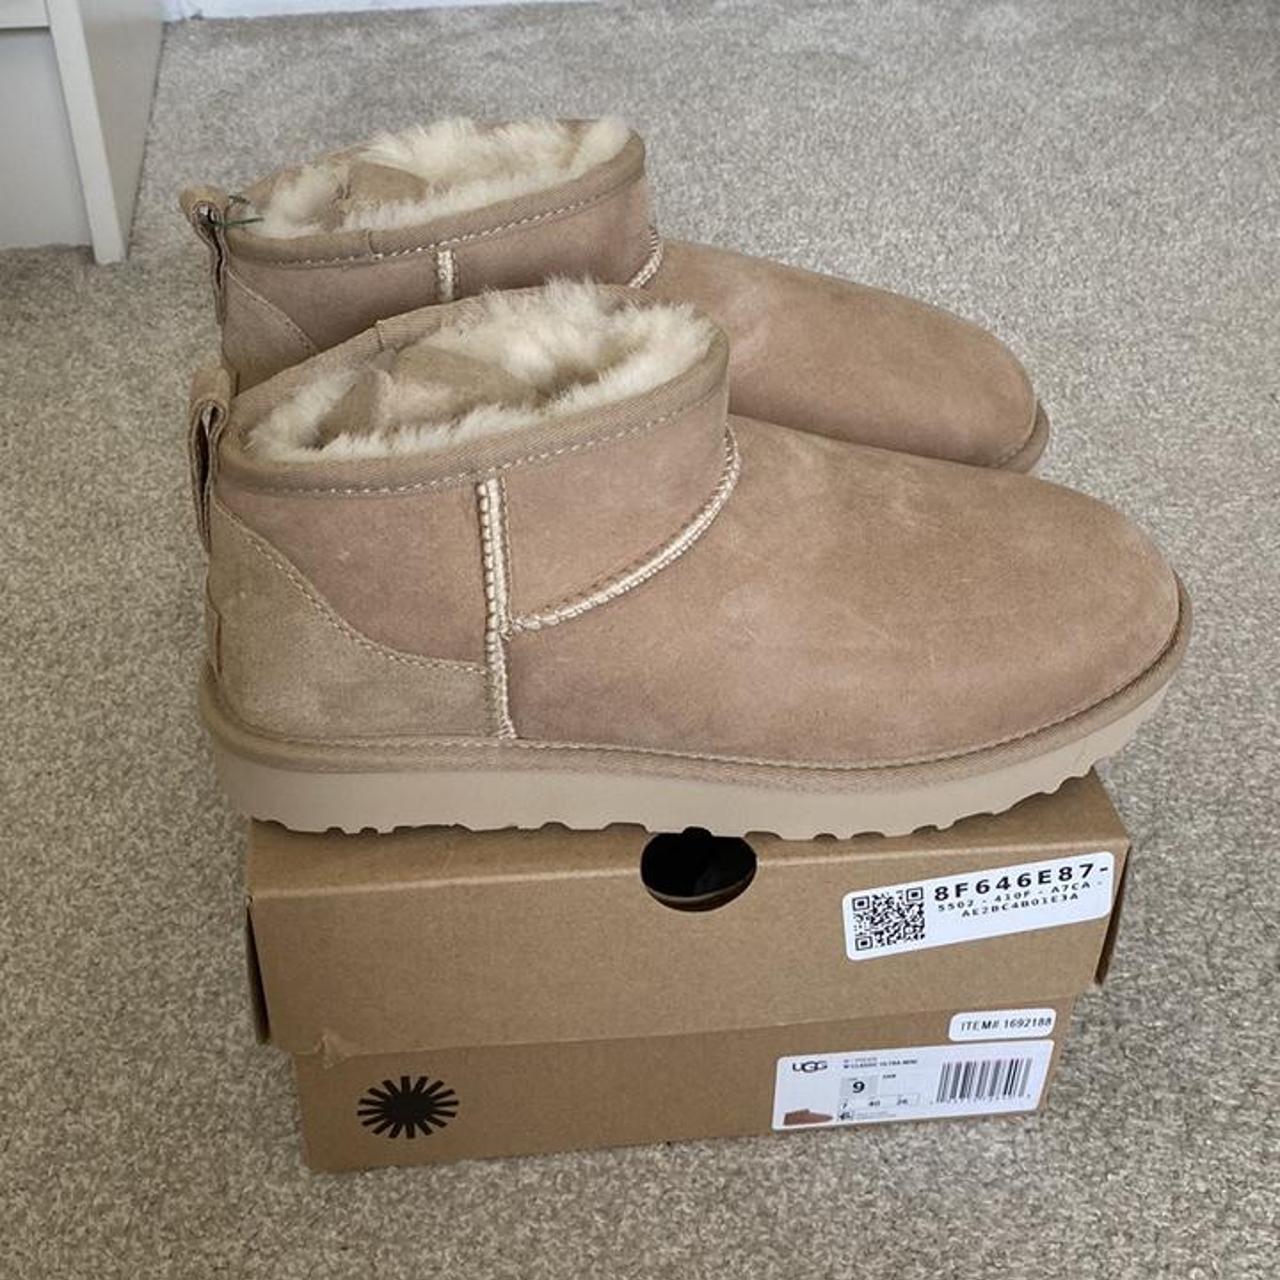 Authentic UGG classic ultra mini ankle boots in sold... - Depop